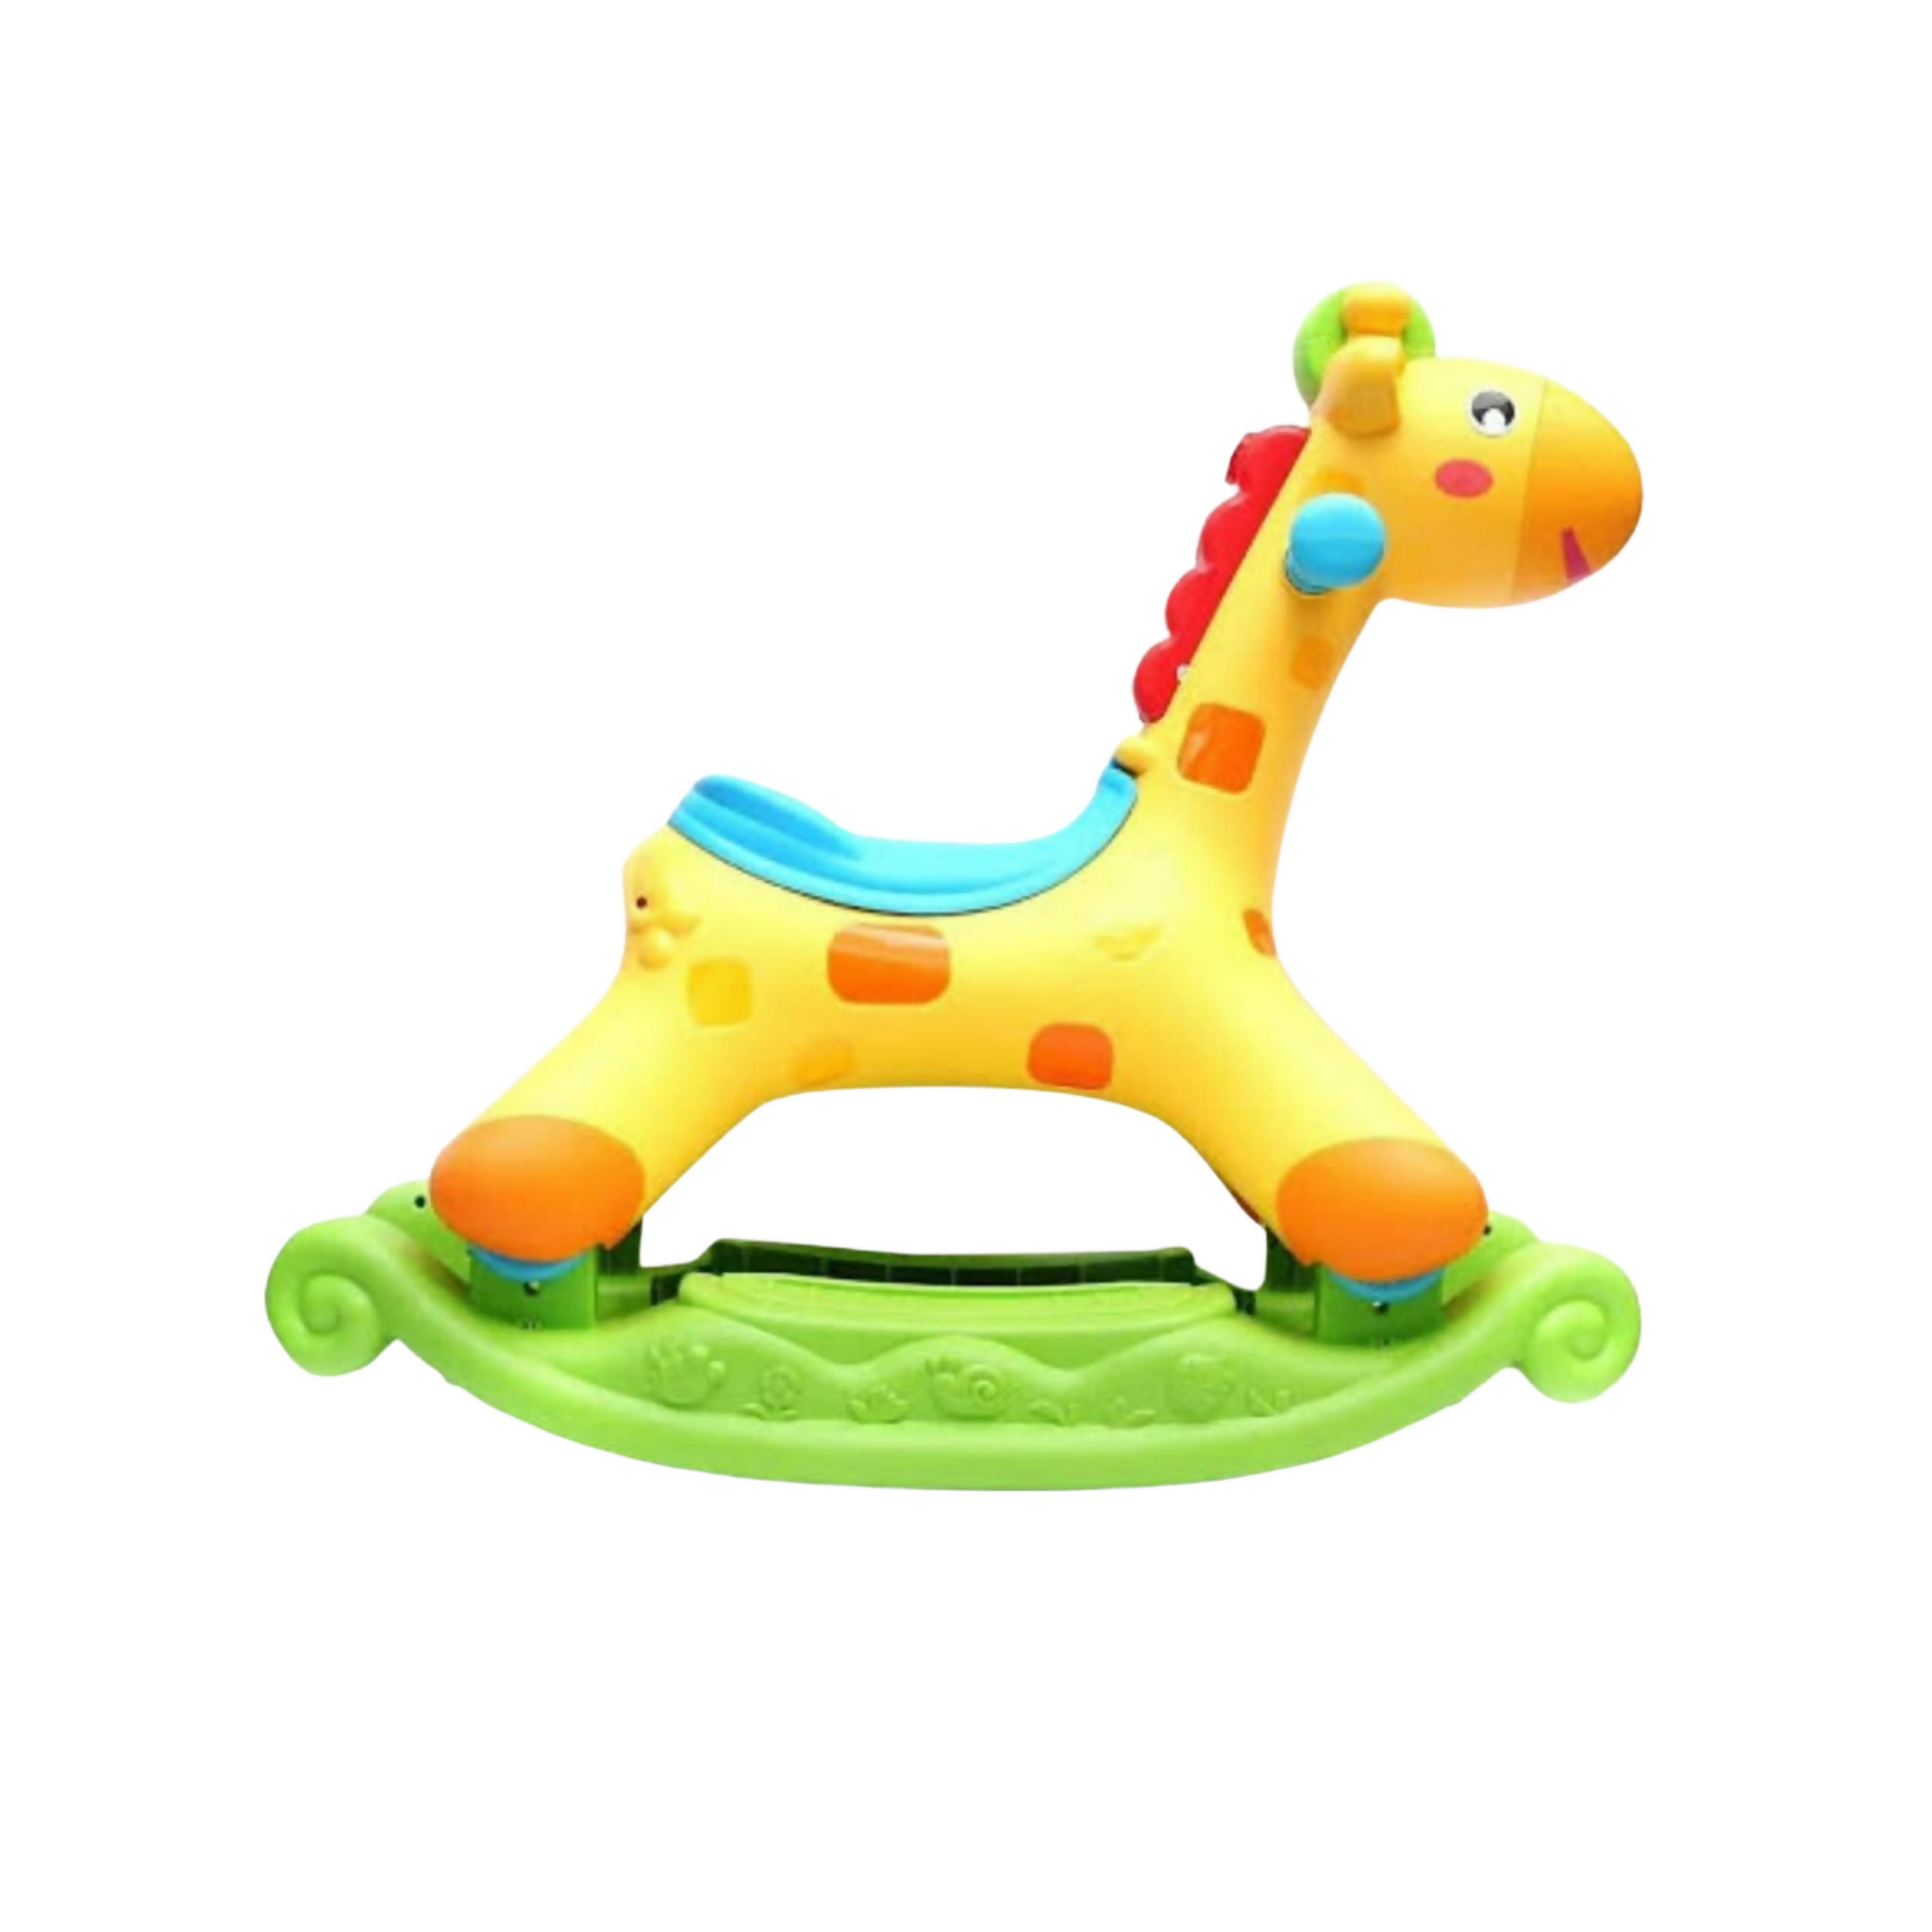 Rocking Riding Giraffe, 2-in-1 Toy with Music & Storage Compartment, for Kids'